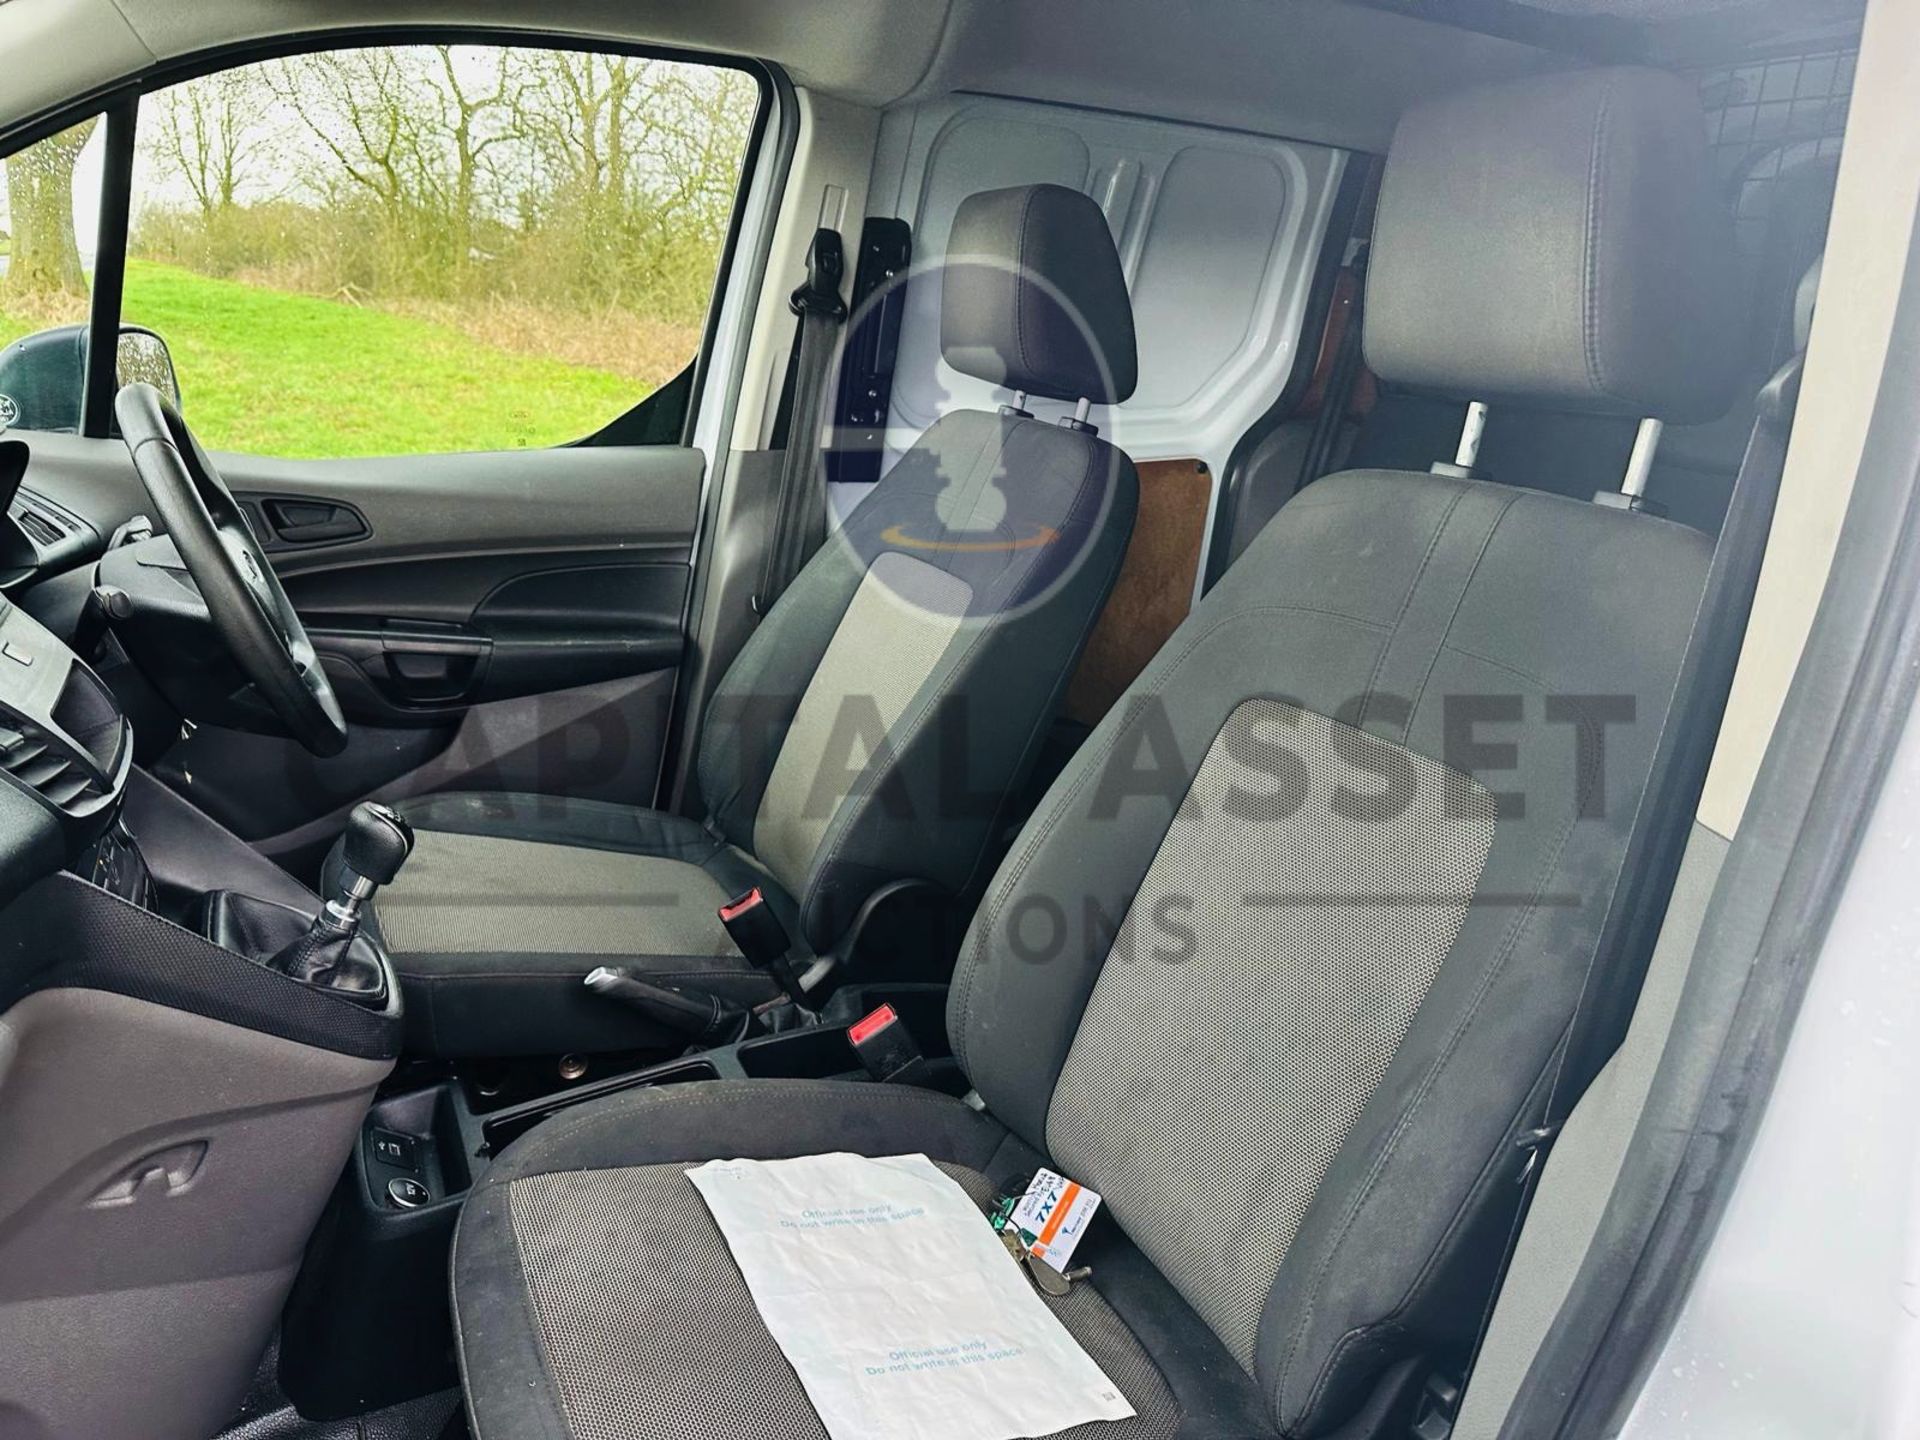 (ON SALE )FORD TRANSIT CONNECT 1.5TDCI (100) 5 SEATER DUALINER / CREW VAN (2019 MODEL) 1 OWNER - Image 23 of 29